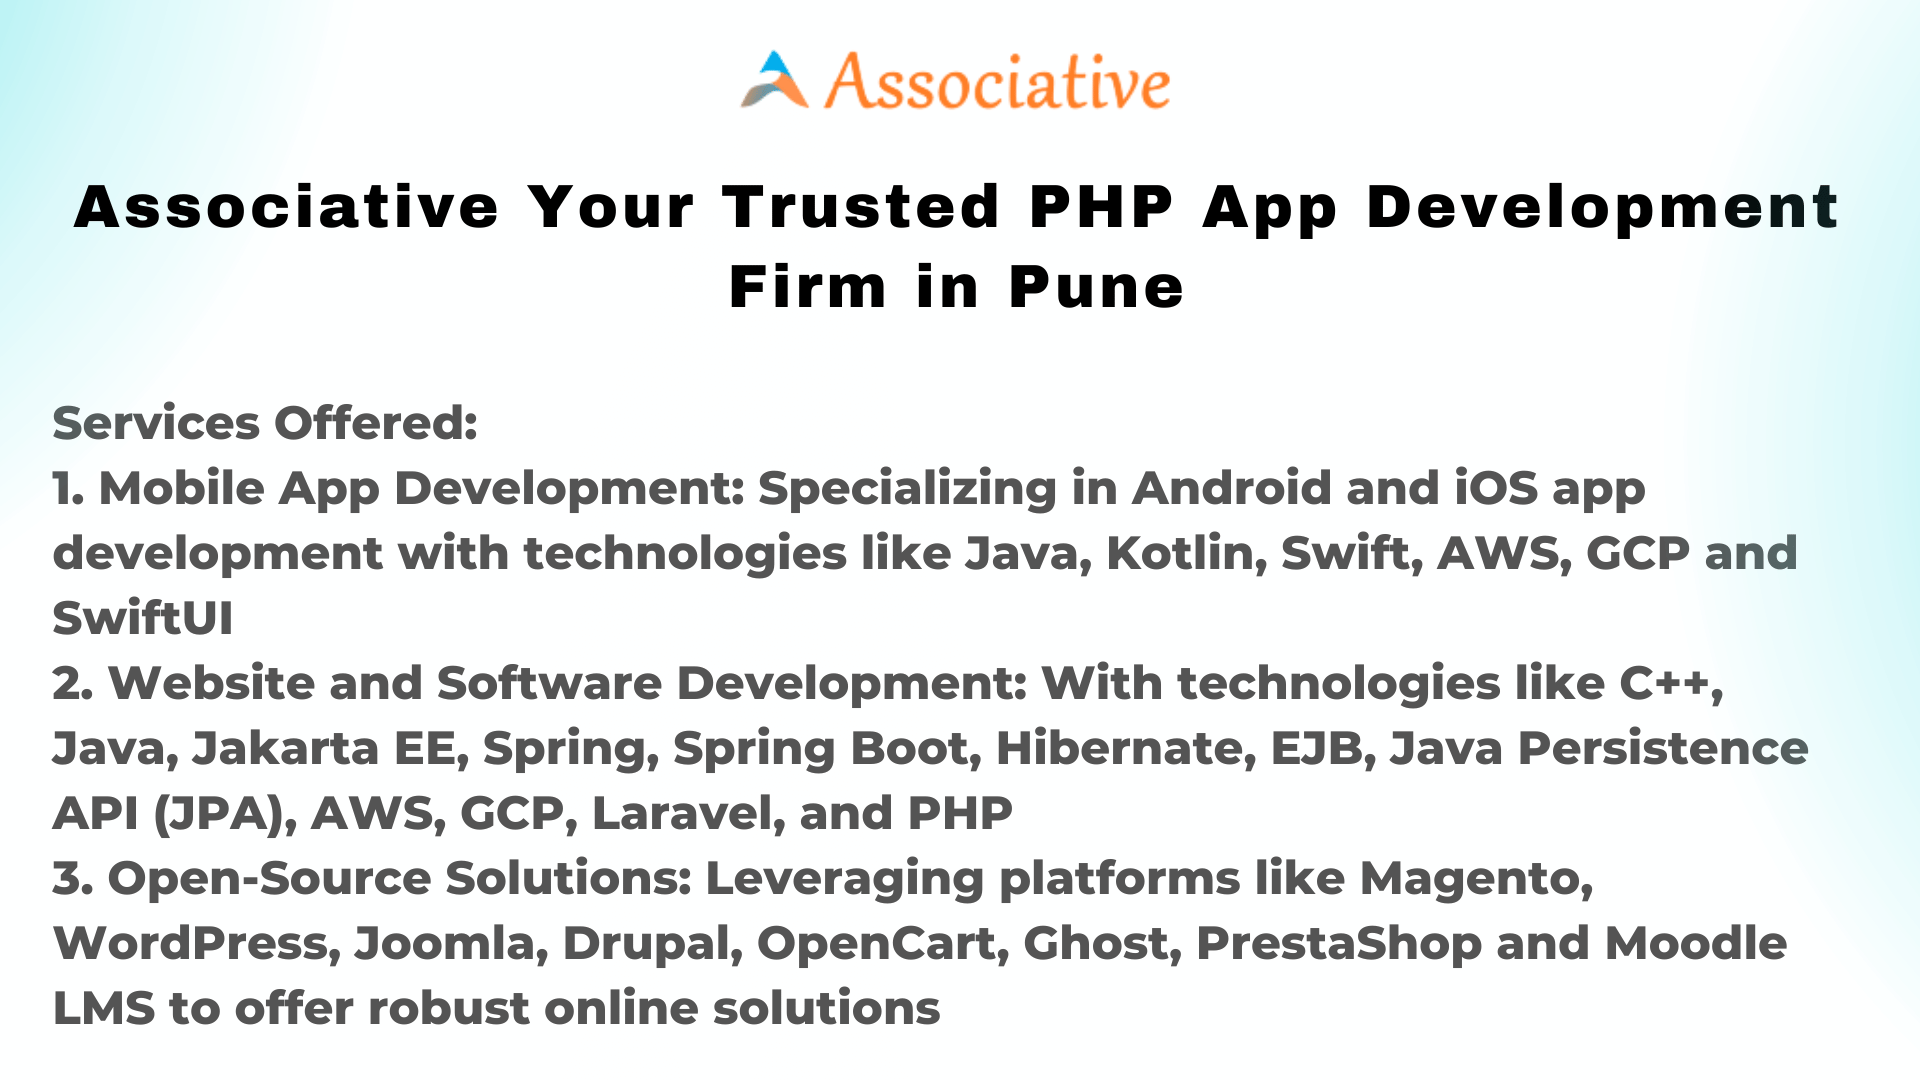 Associative Your Trusted PHP App Development Firm in Pune